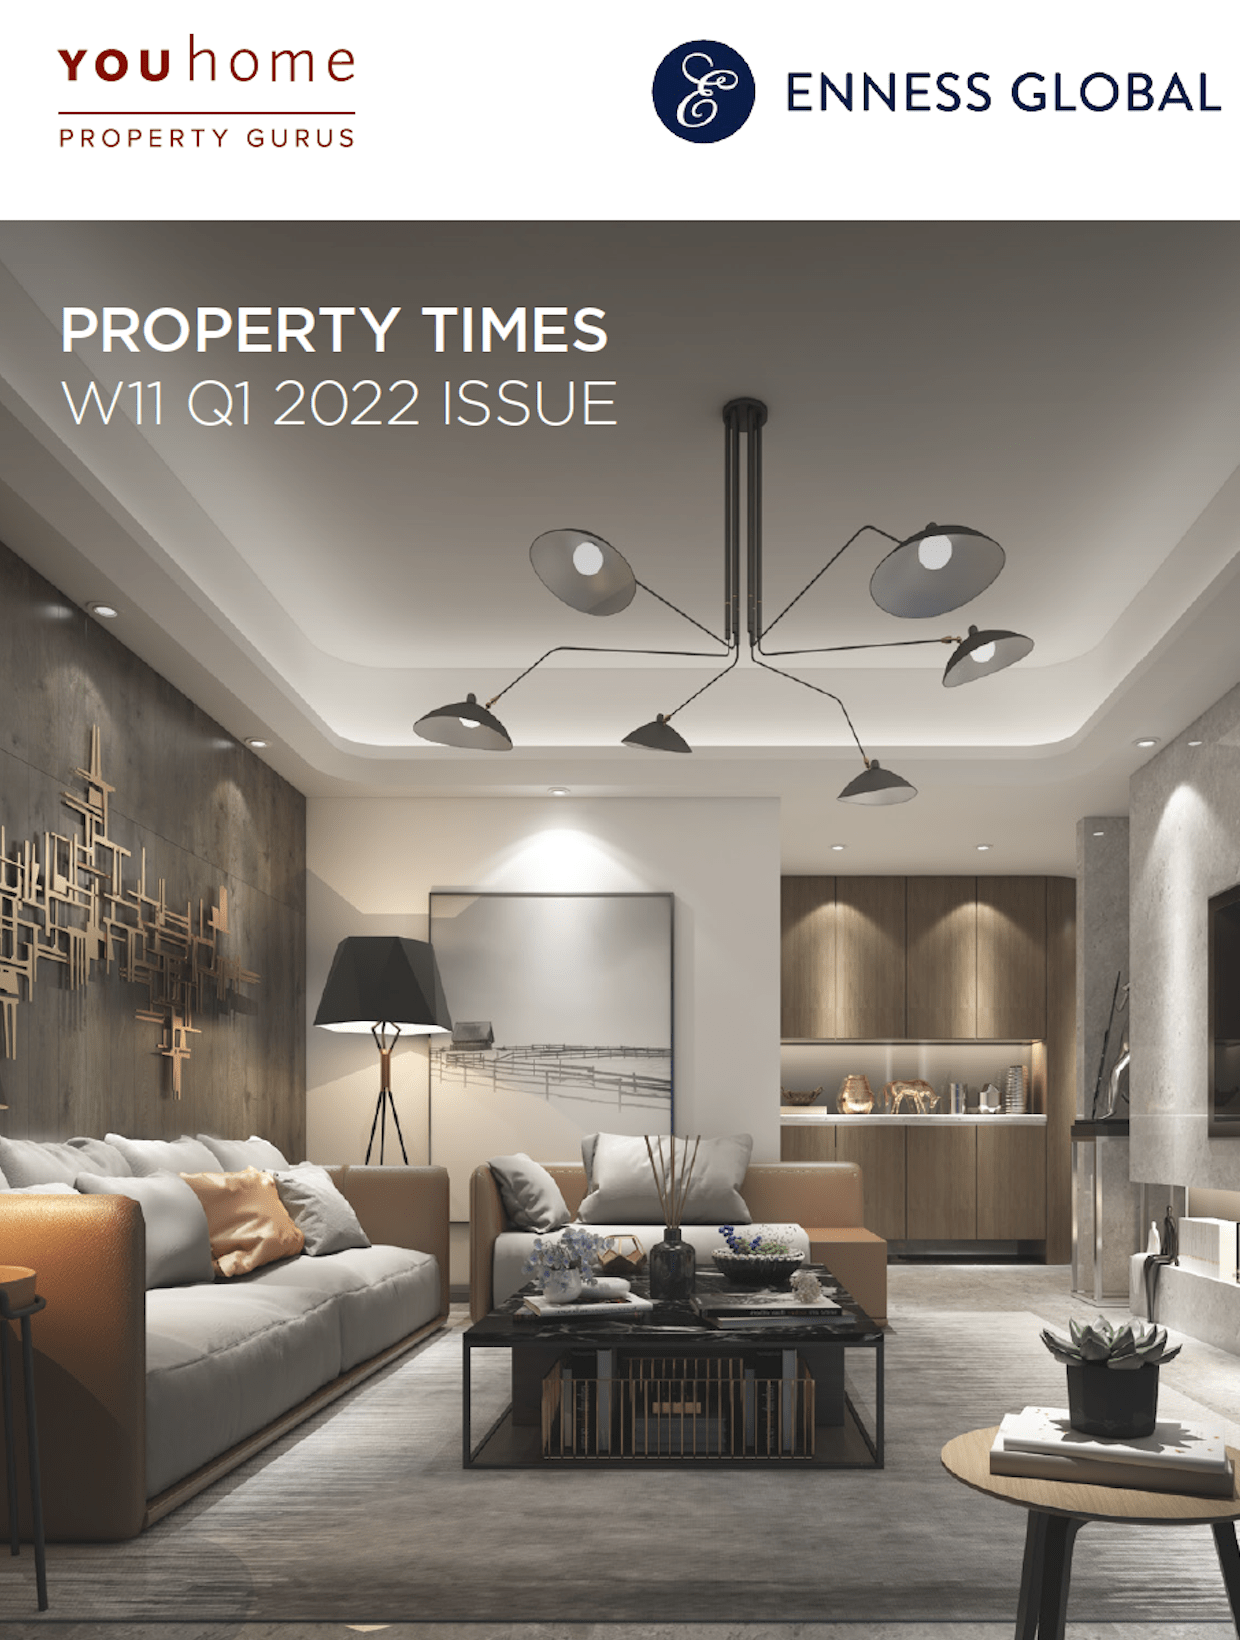 W11 Local Property Trends